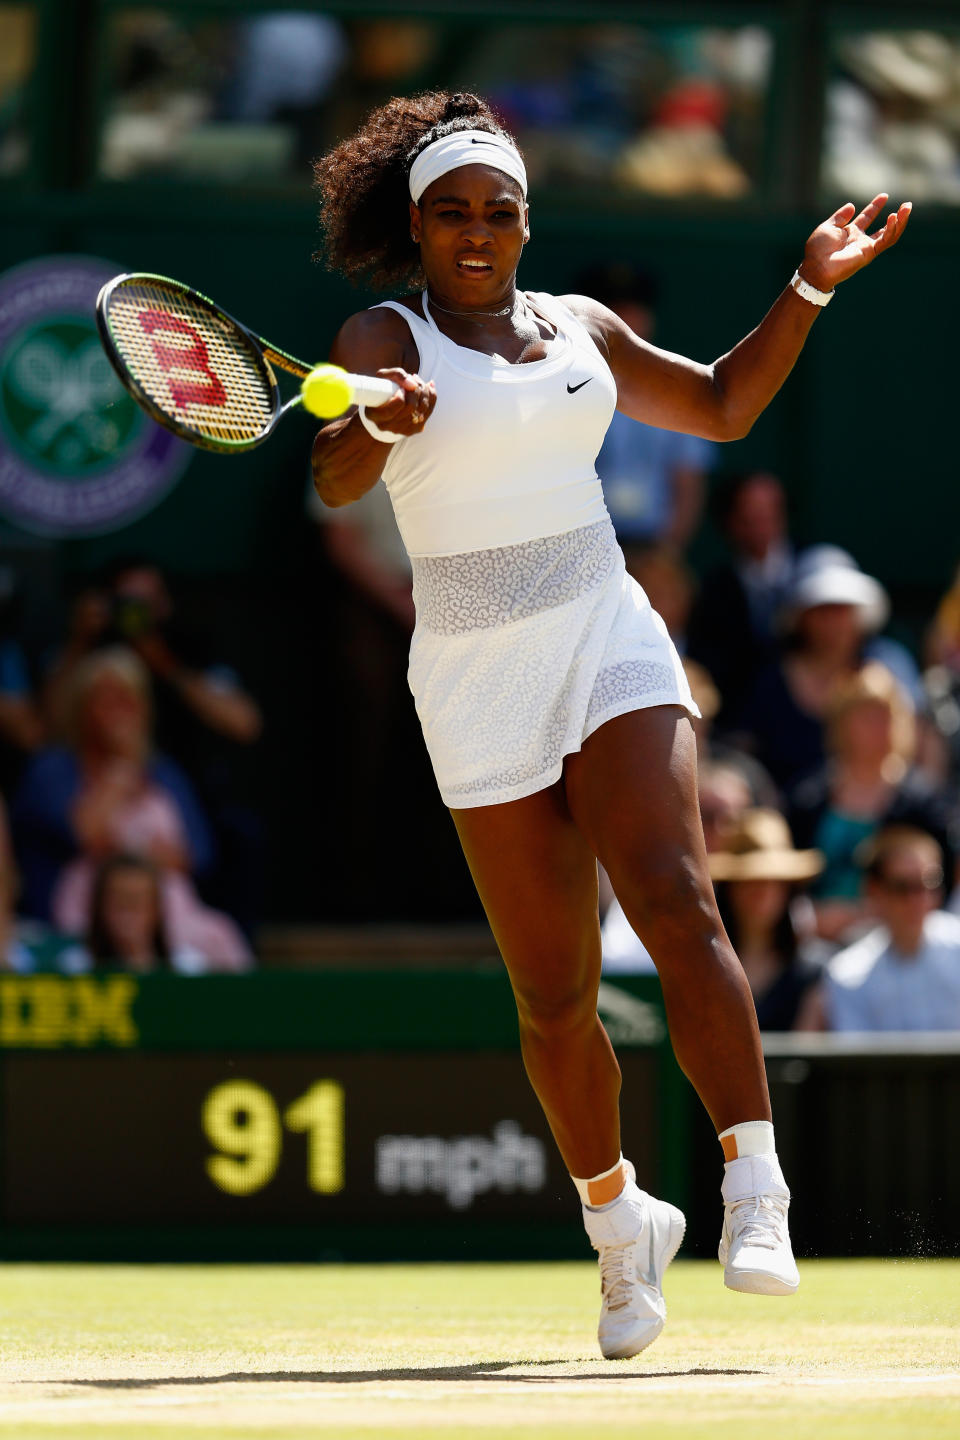 LONDON, ENGLAND - JULY 11:  Serena Williams of the United States plays a forehand in the Final Of The Ladies' Singles against Garbine Muguruza of Spain during day twelve of the Wimbledon Lawn Tennis Championships at the All England Lawn Tennis and Croquet Club on July 11, 2015 in London, England.  (Photo by Julian Finney/Getty Images)